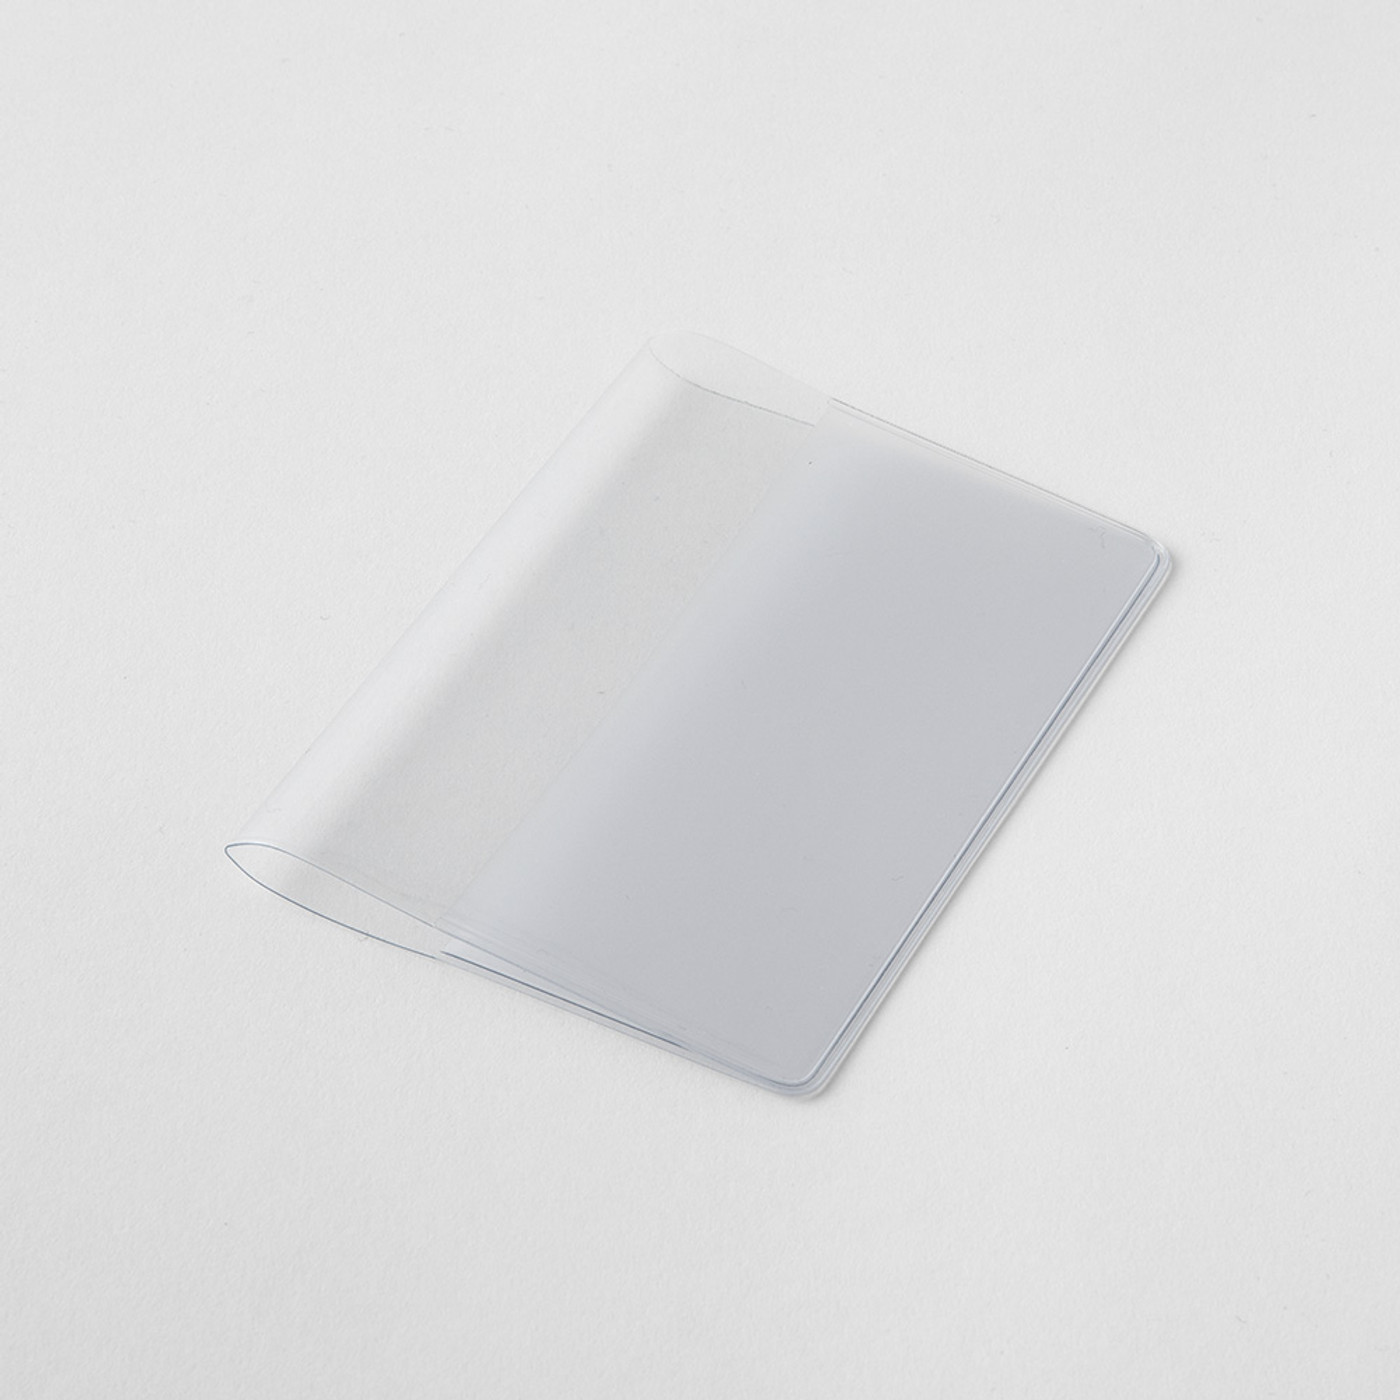 MD Paper notebook cover - CLEAR - A7